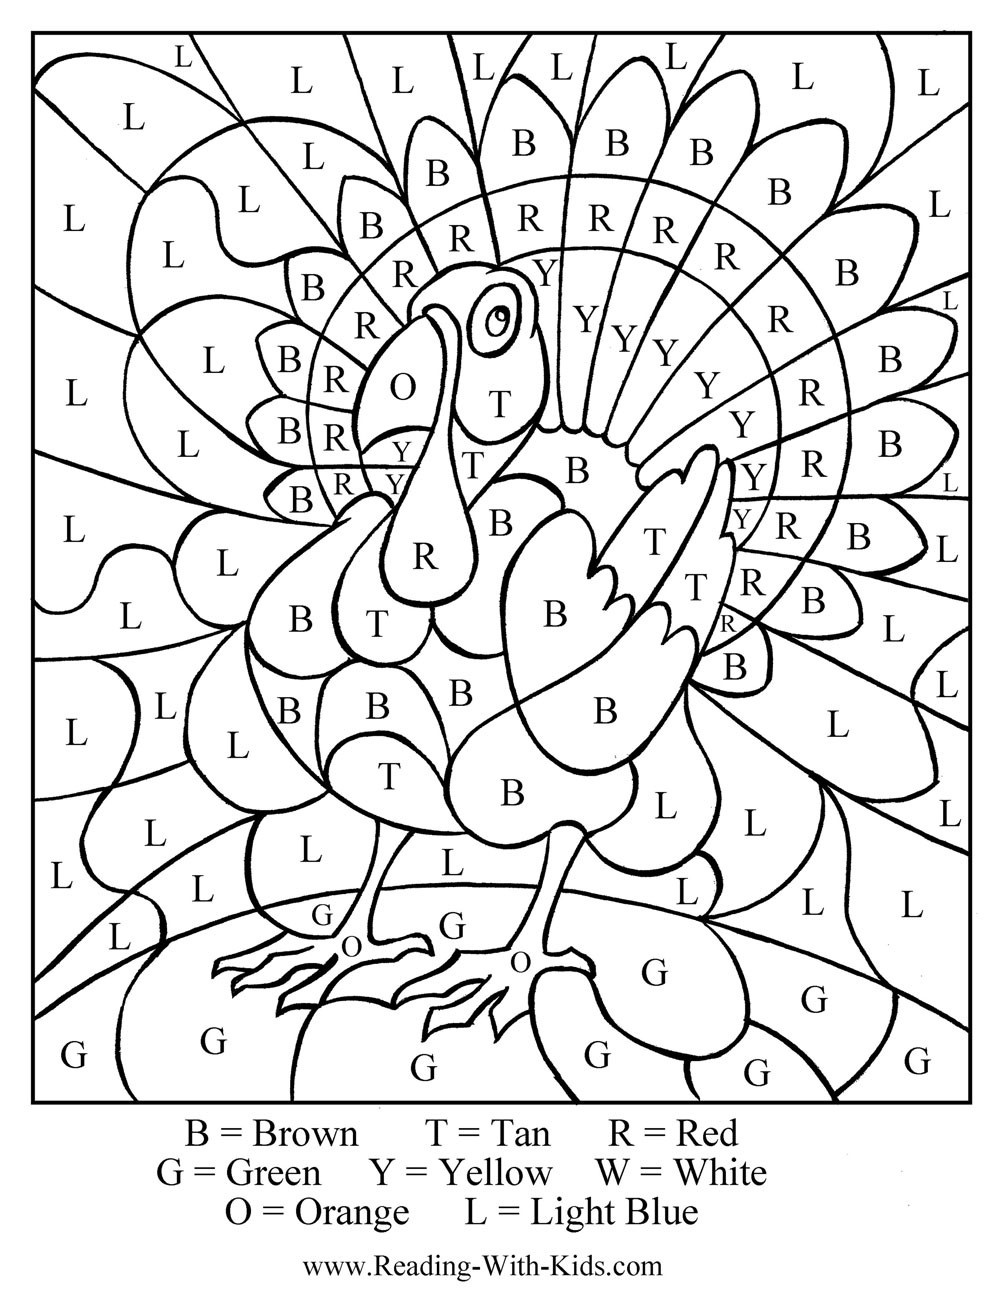 Thanksgiving Turkey Printable
 Free Thanksgiving Coloring Pages & Games Printables